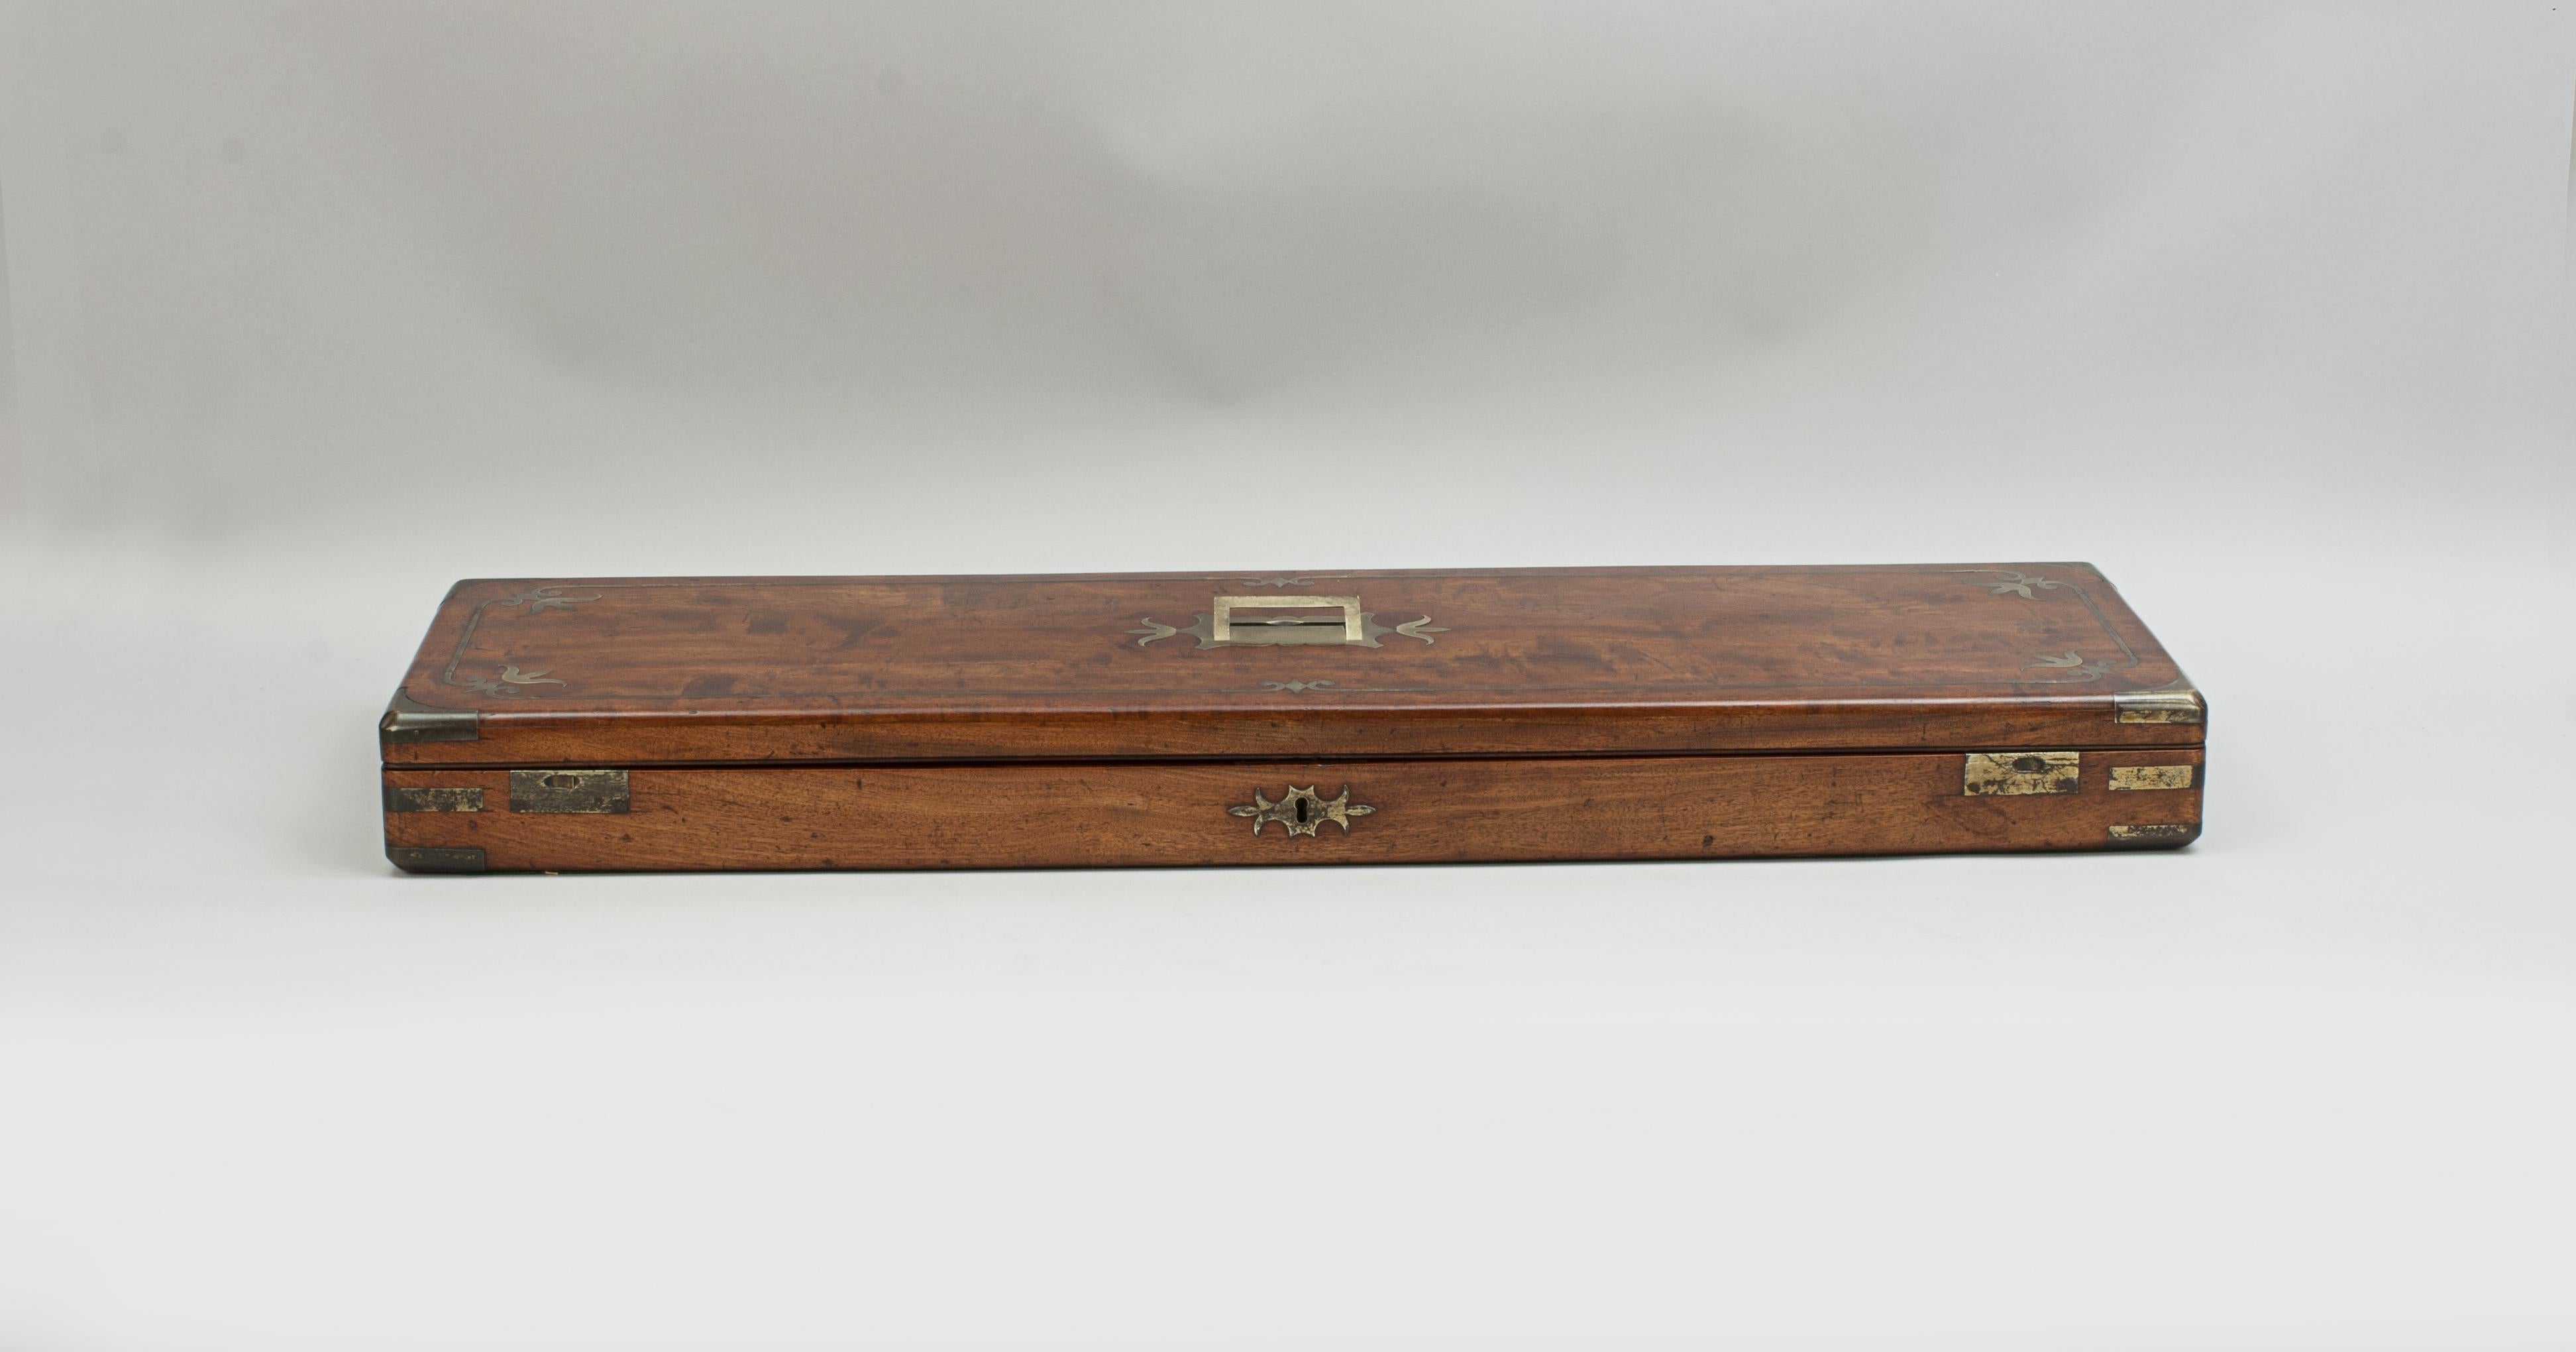 Mahogany sporting gun case.
A very nice mahogany single gun case of exeptional quality, with brass corner protecters and excellent brass inlay to the lid. The lid is also fitted with a central flush brass handle, has two brass hook catches and a